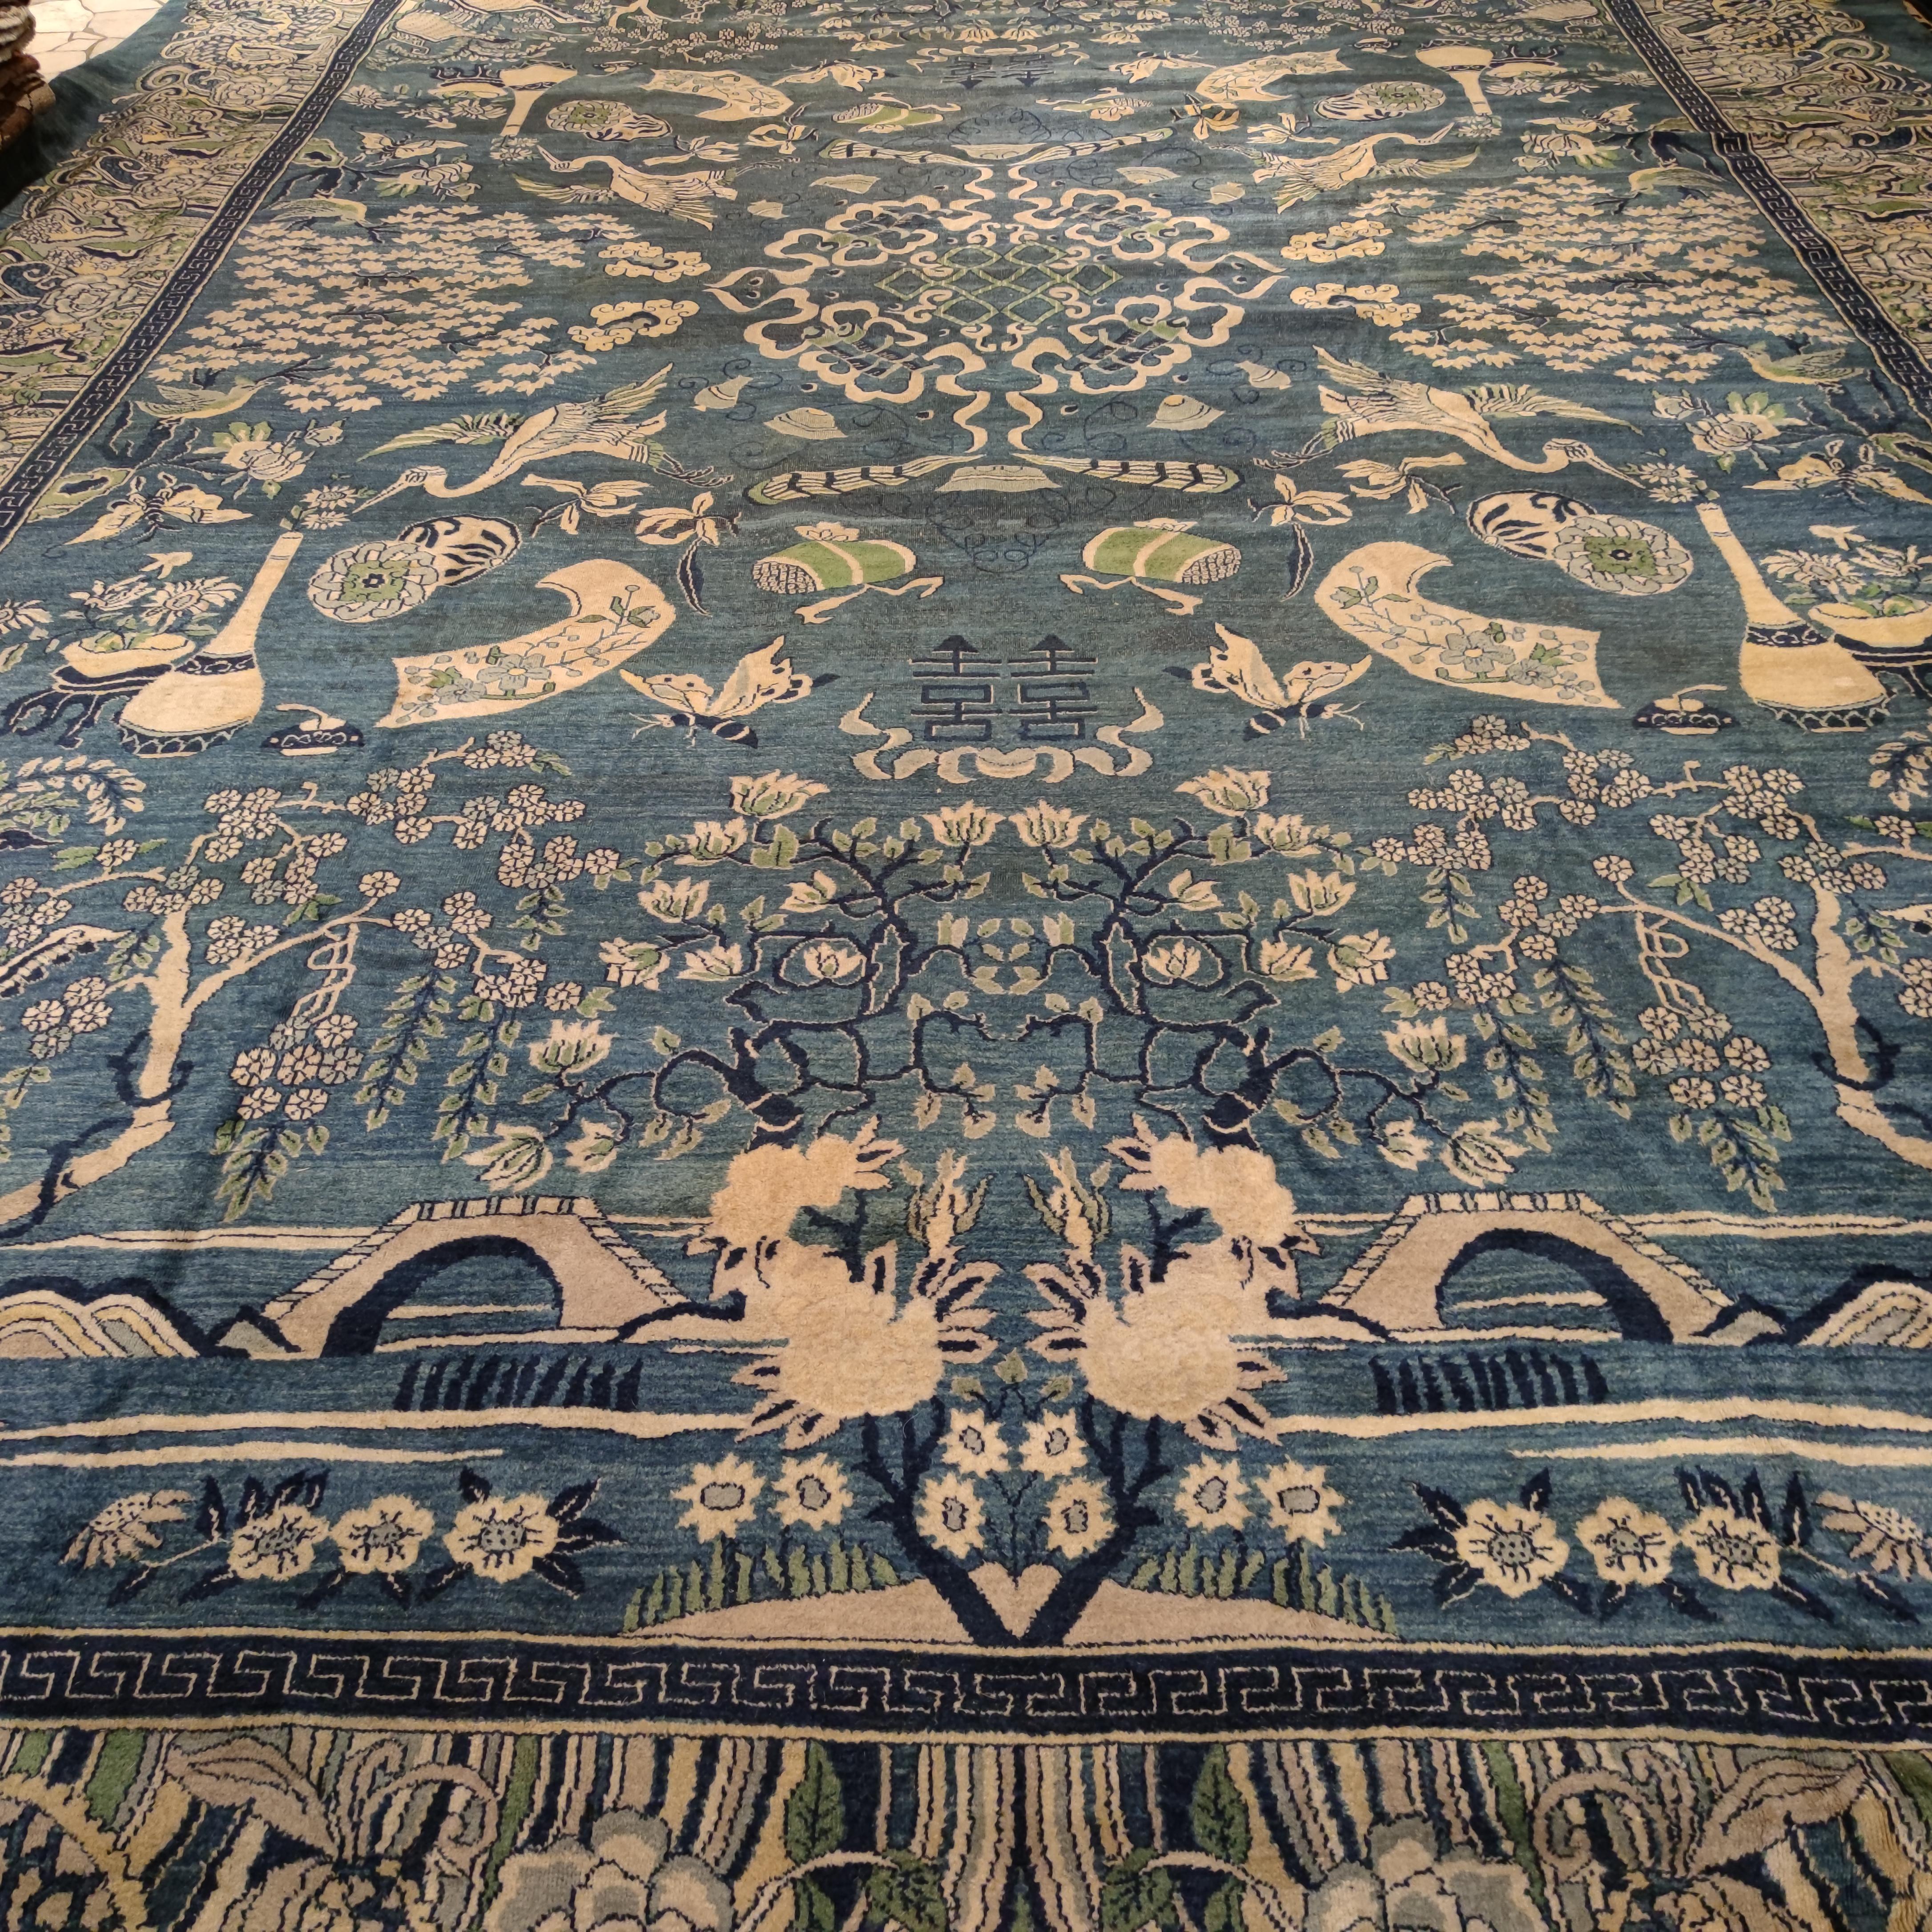 Spectacular Antique Sky Blue Indochine Rug with Cranes and Longevity Symbols In Good Condition For Sale In Milan, IT